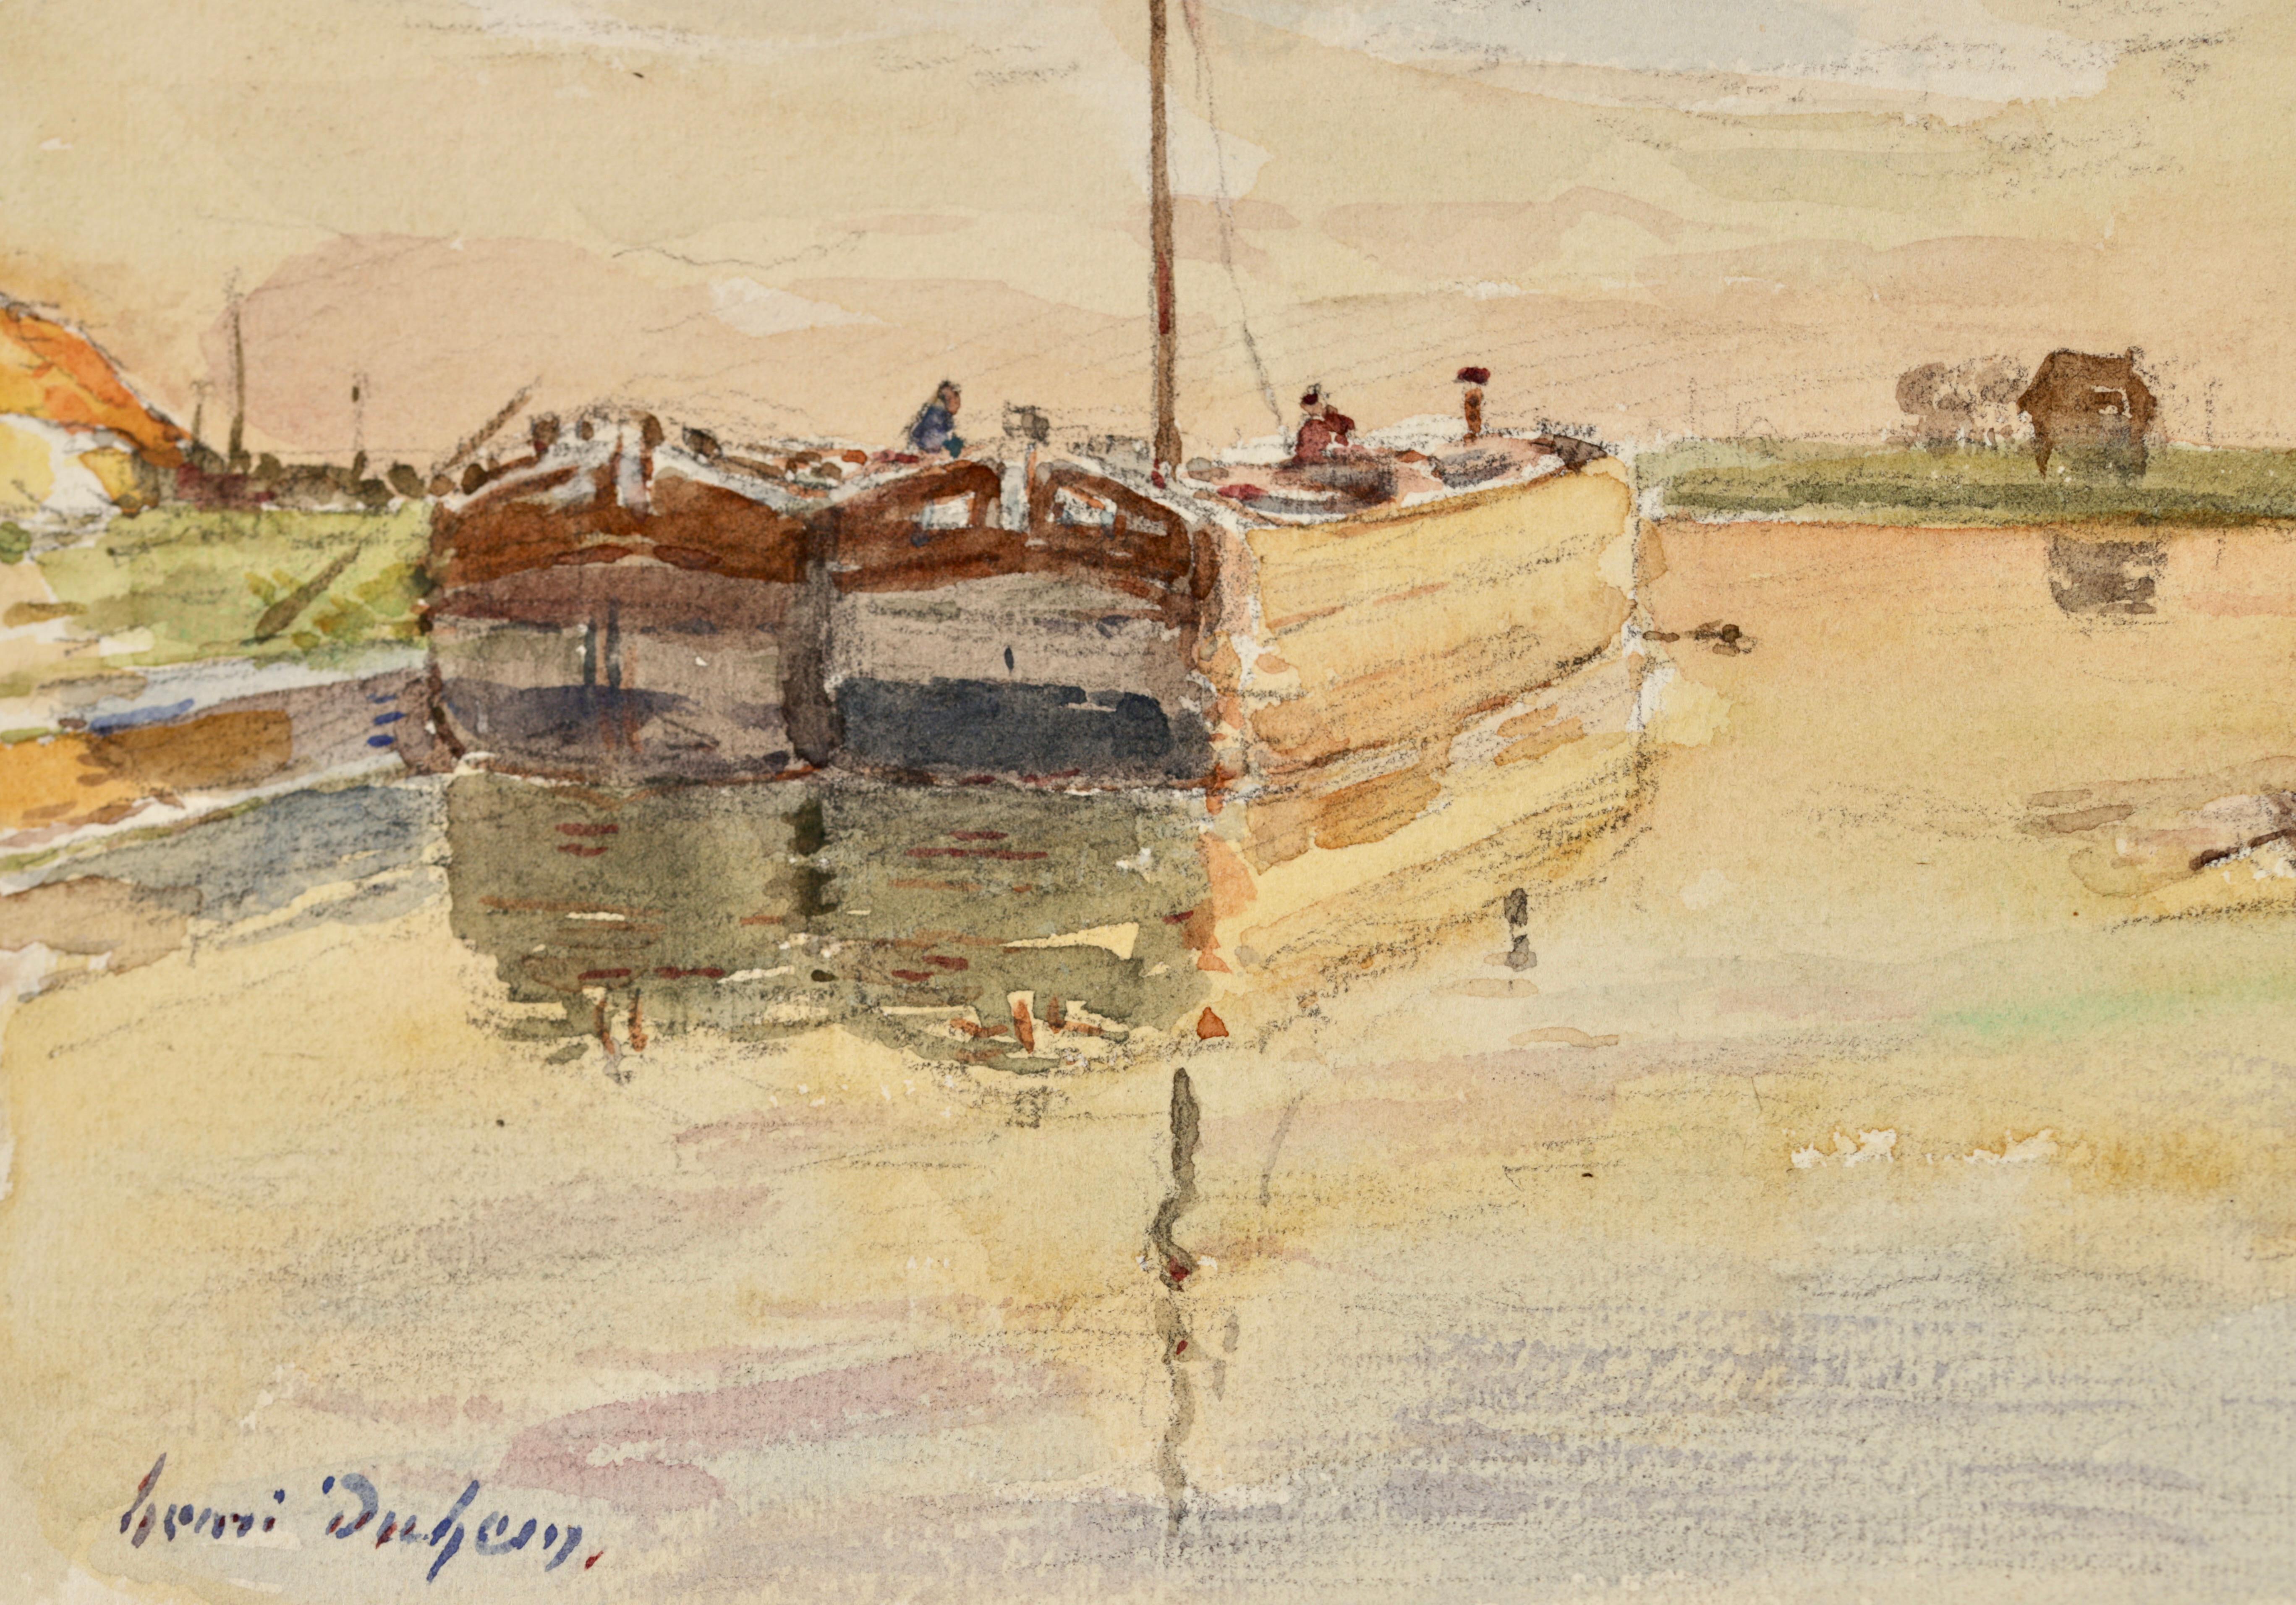 Signed impressionist figures in riverscape watercolour on paper circa 1920 by Henri Duhem. This lovely piece depicts men working on barges on a canal in Douai as the sun sets leaving an orange-yellow glow in the water below. A silhouette of a man in